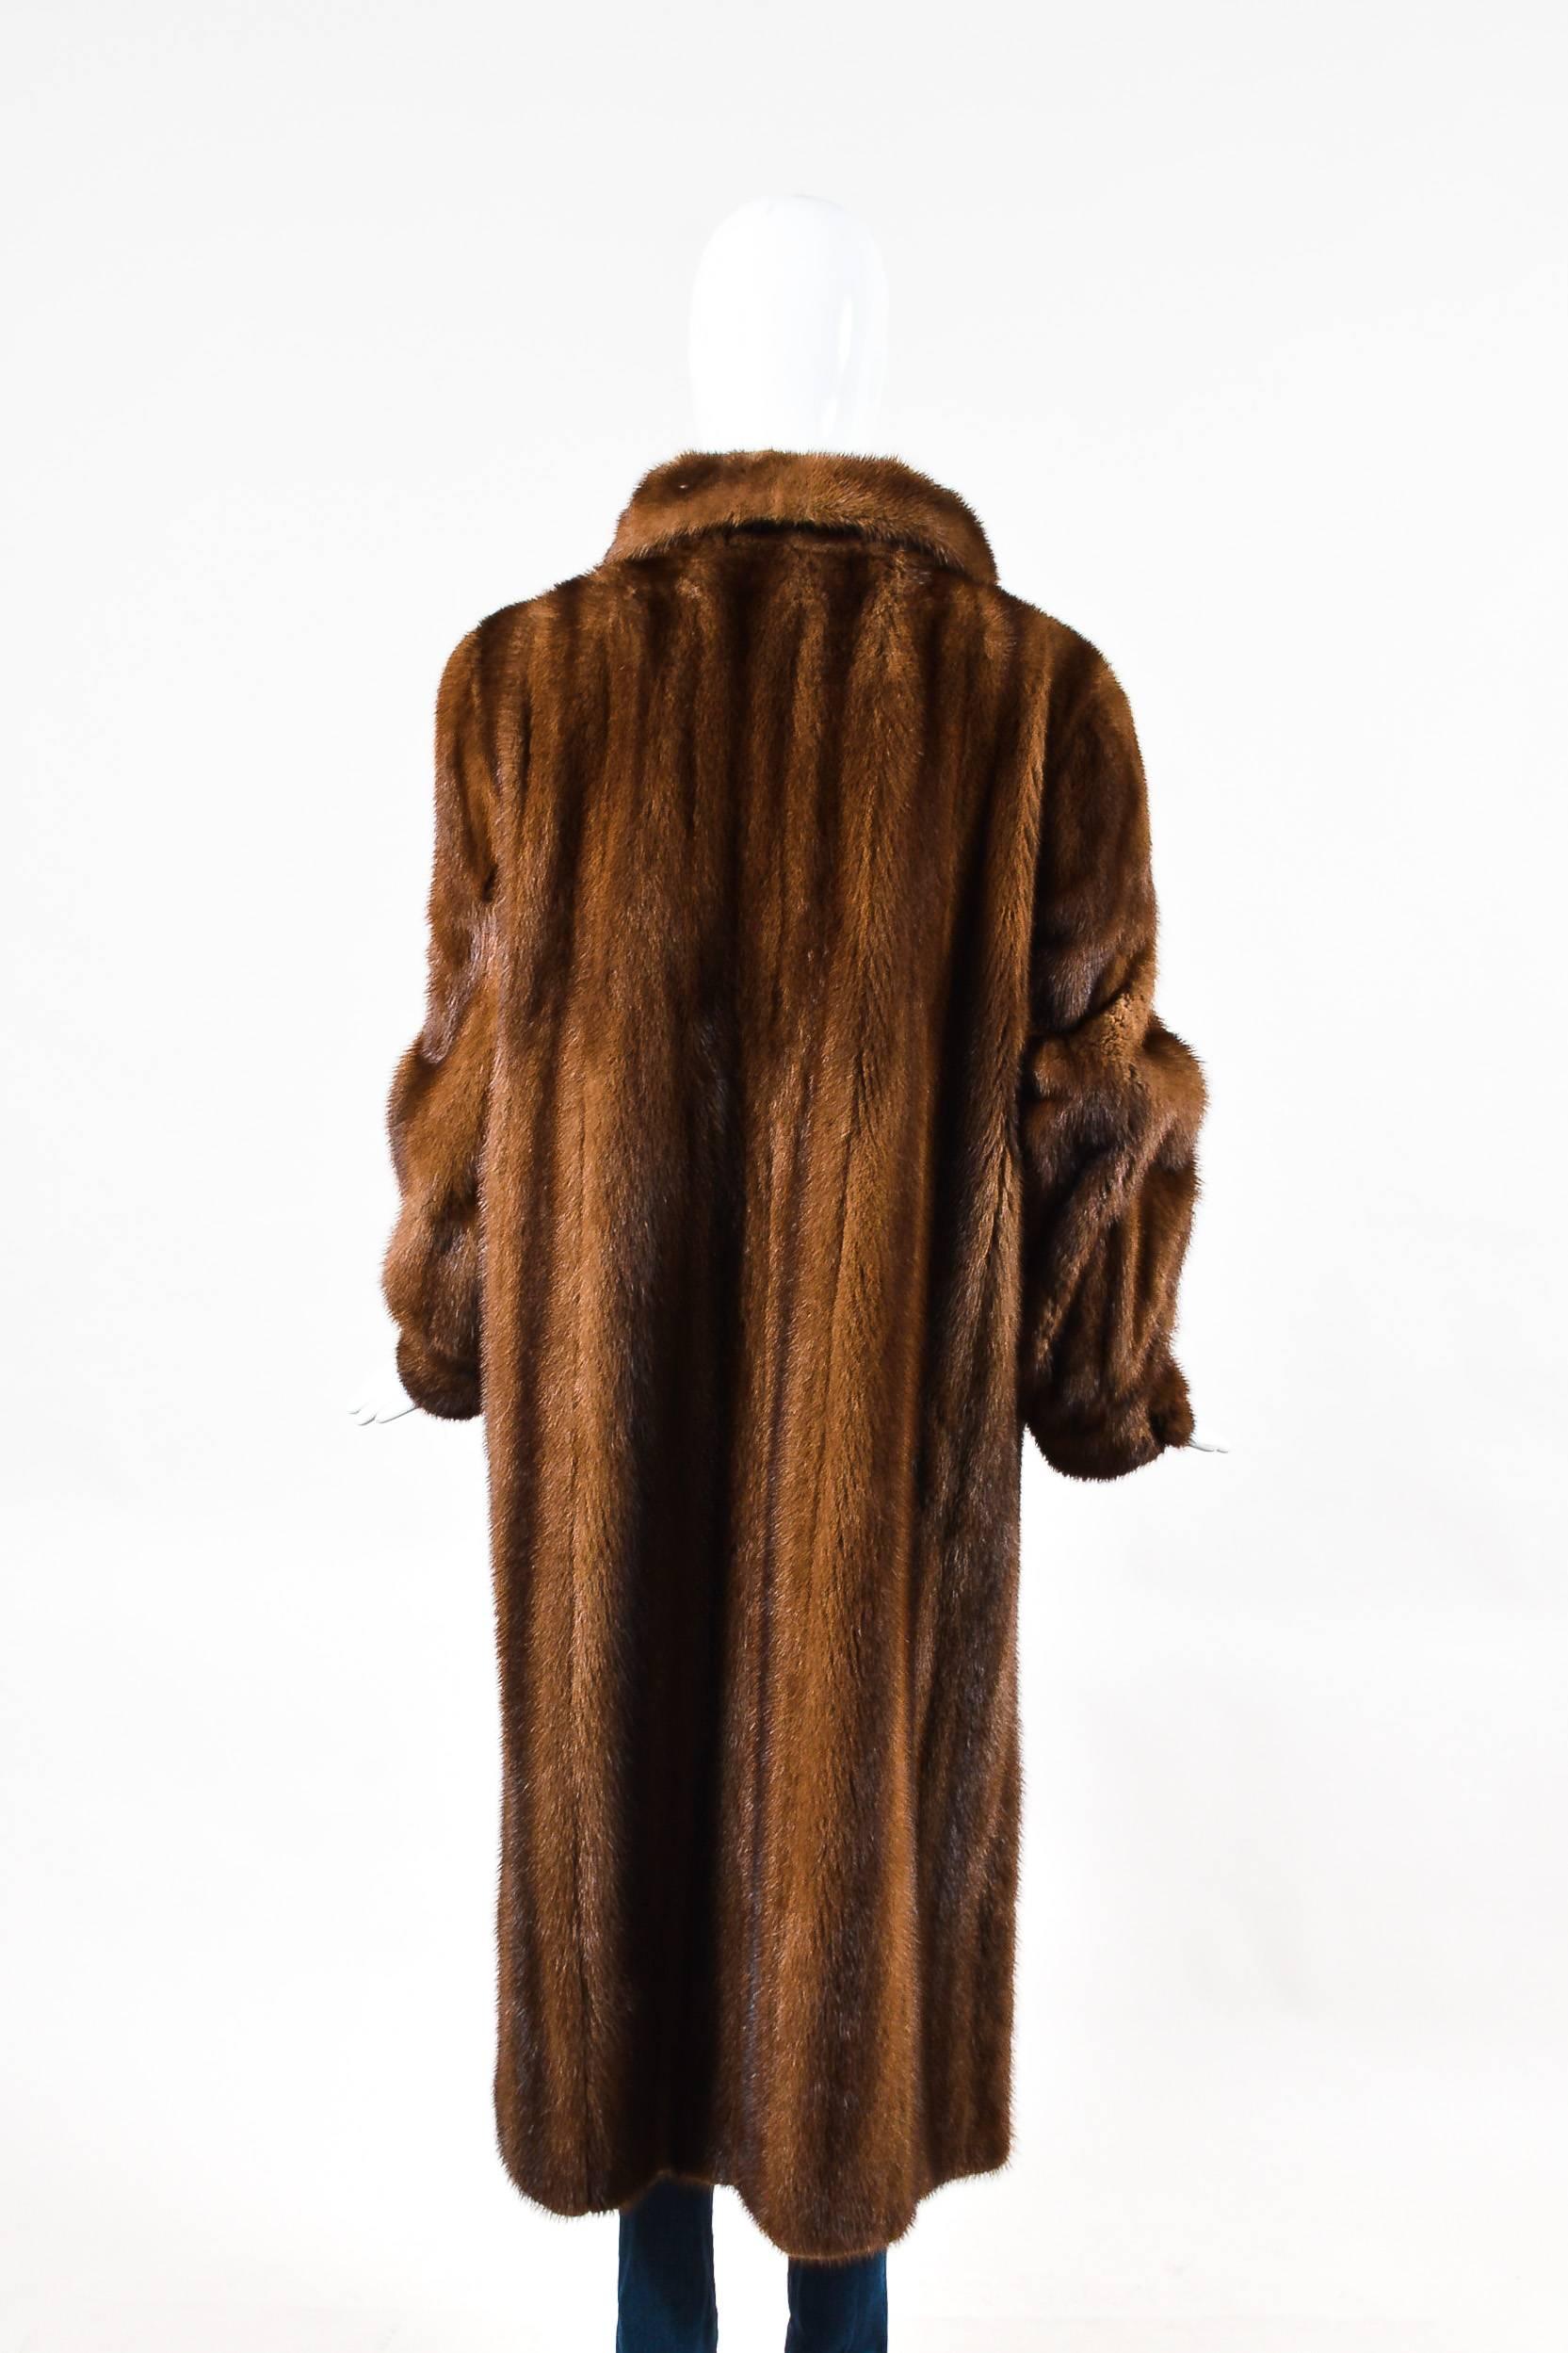 Vintage brown fur long coat from Oscar de la Renta. Thick collar. One button and three hook and eyes down the front for closure. Shoulder pads for a structured look. Two front open pockets. Cuffed sleeves with button closures. Long slits on the side